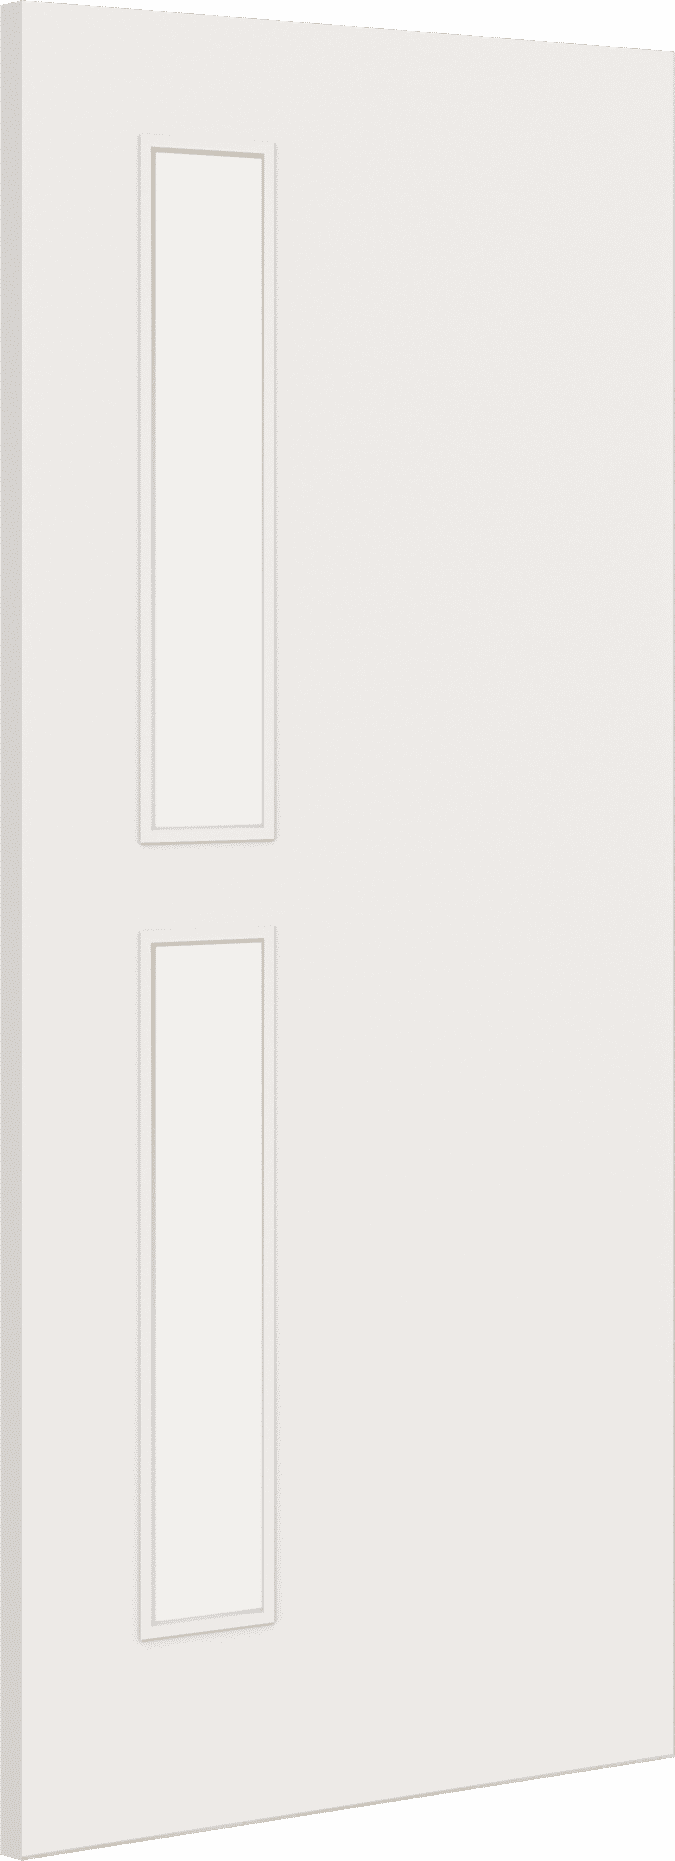 2040mm x 826mm x 44mm Architectural Paint Grade White 07 Clear Glazed Fire Door Blank